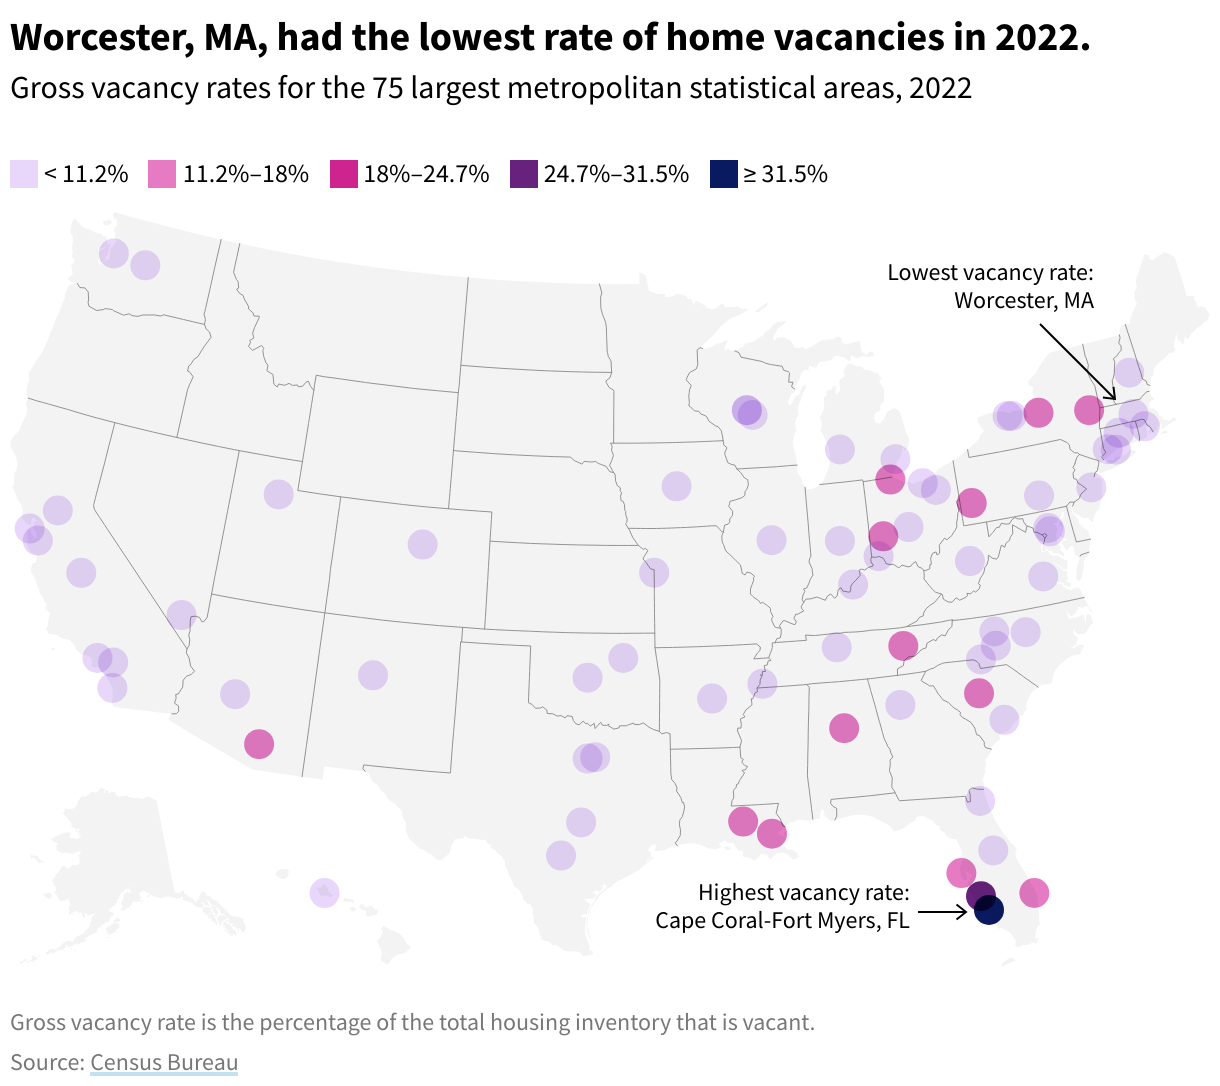 Map showing gross vacancy rates in the largest 75 metropolitan statistical areas in 2022